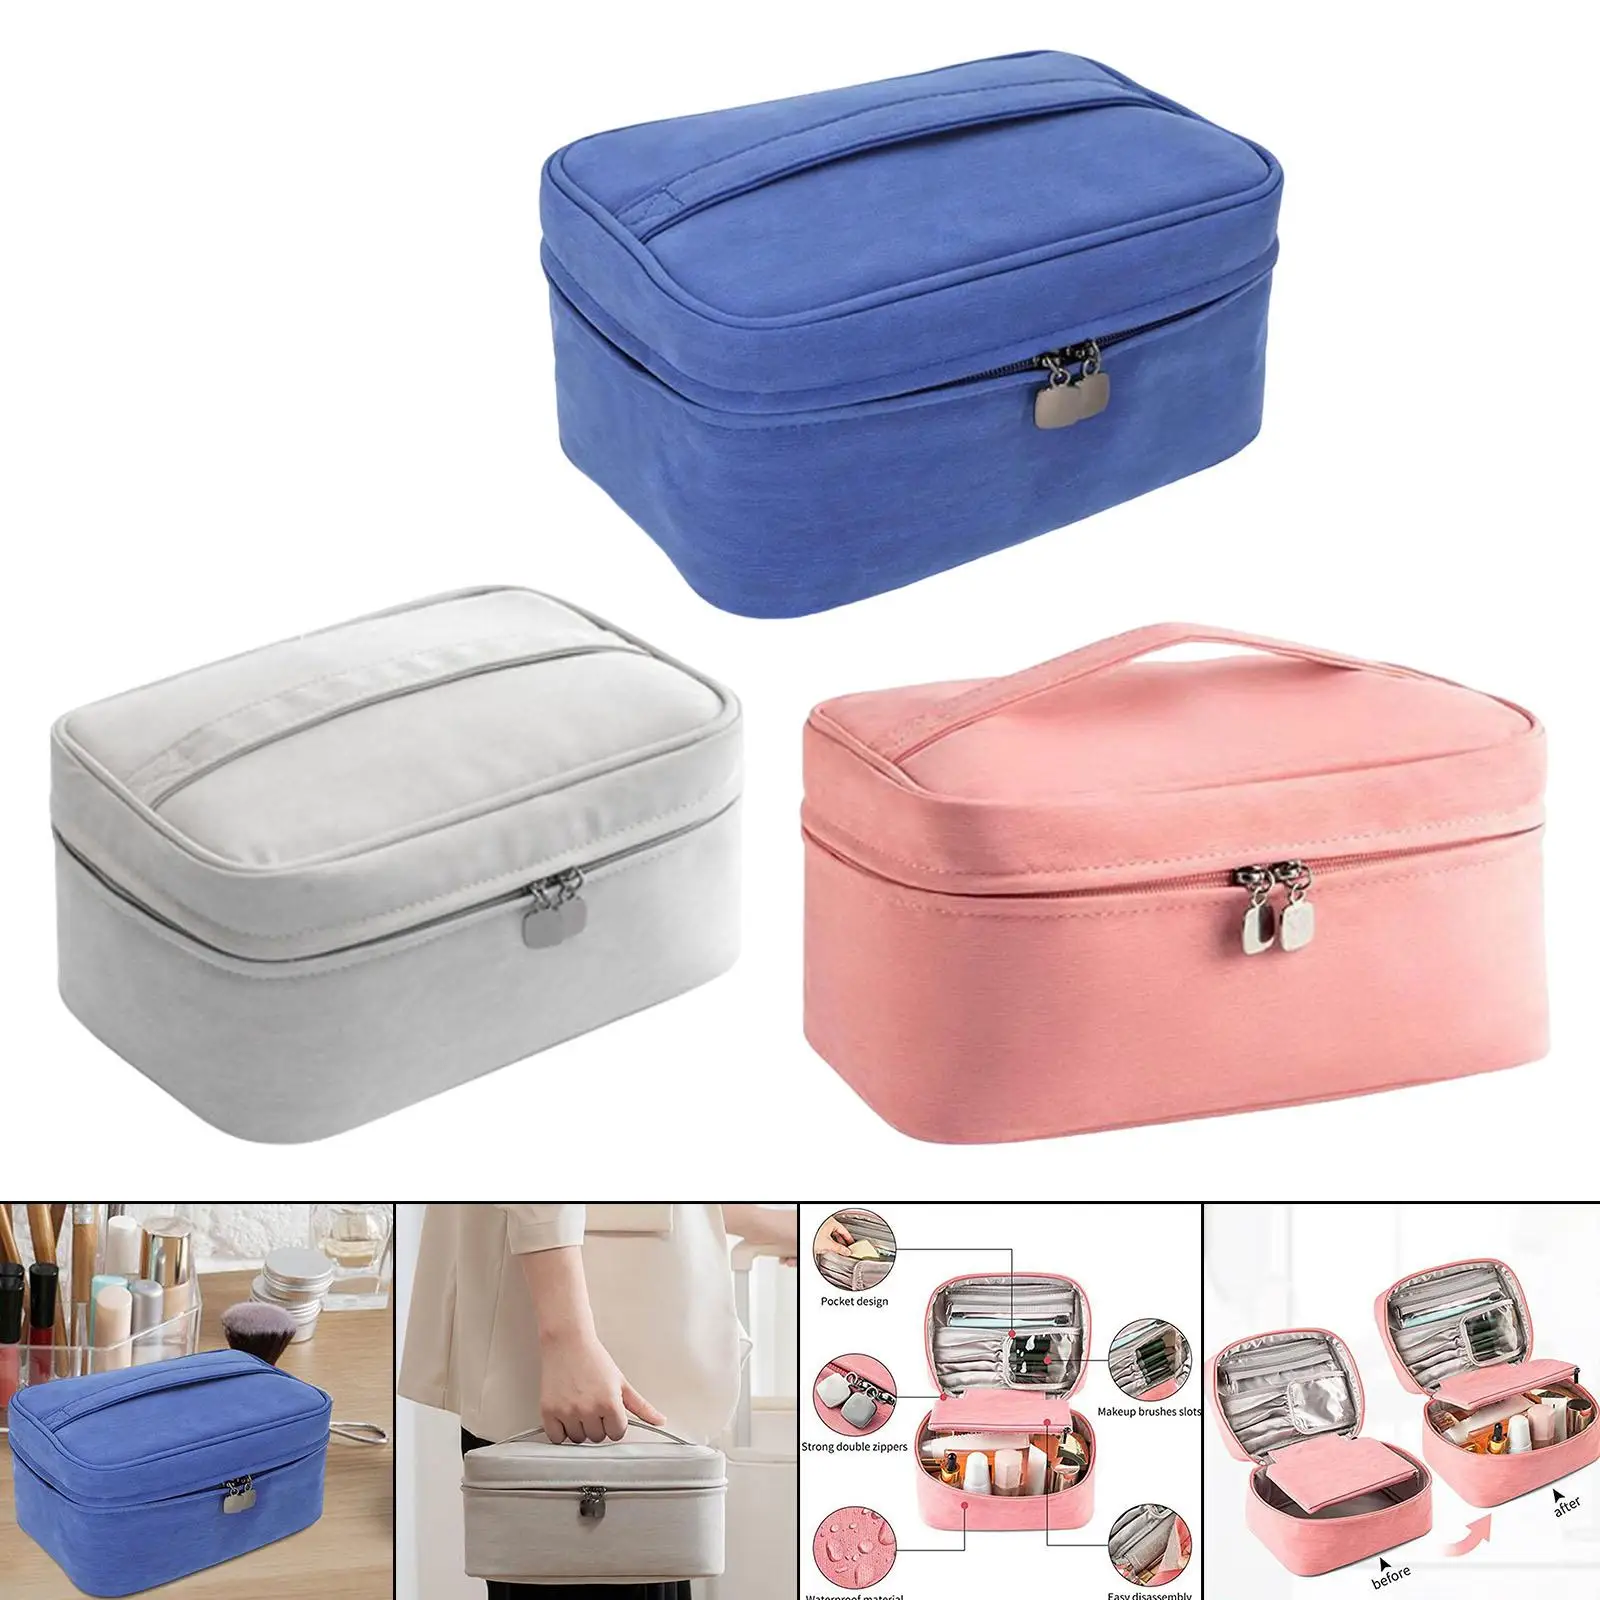 Makeup Organizer Bag with Detachable Pouch with Brush Holder Pouch PU Resin Cosmetic Bag Make up Bag for Foundation Women Girls